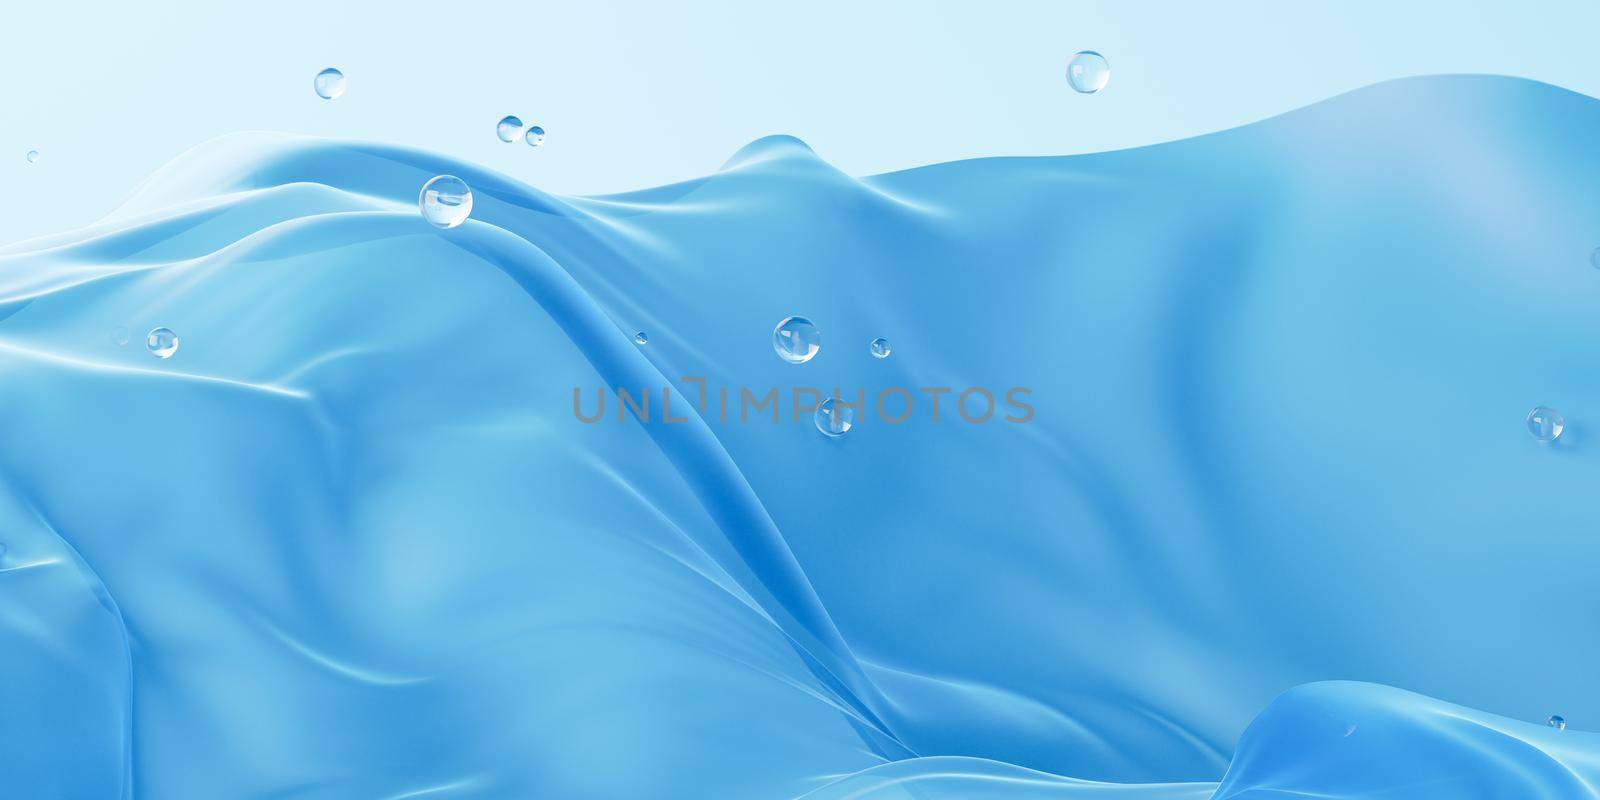 Flowing cloth background, 3d rendering. Computer digital drawing.